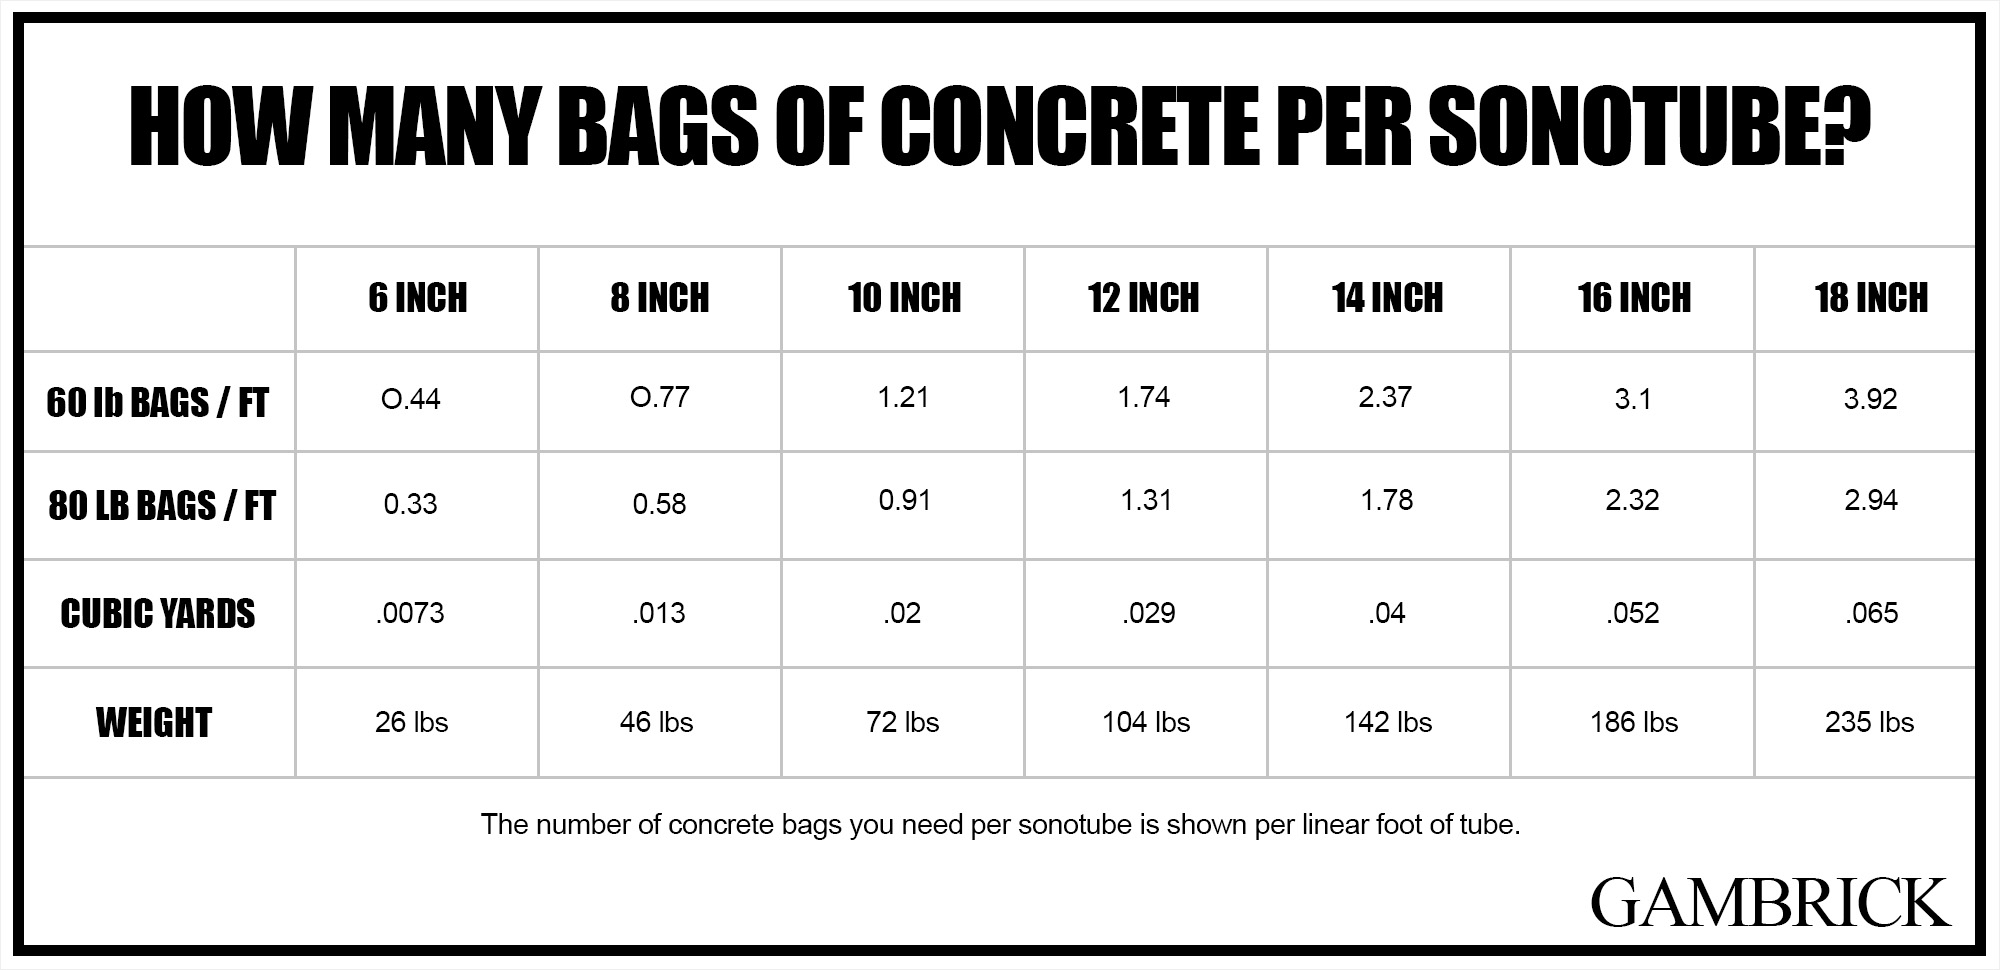 how many bags of concrete per sonotube infographic chart 1.1